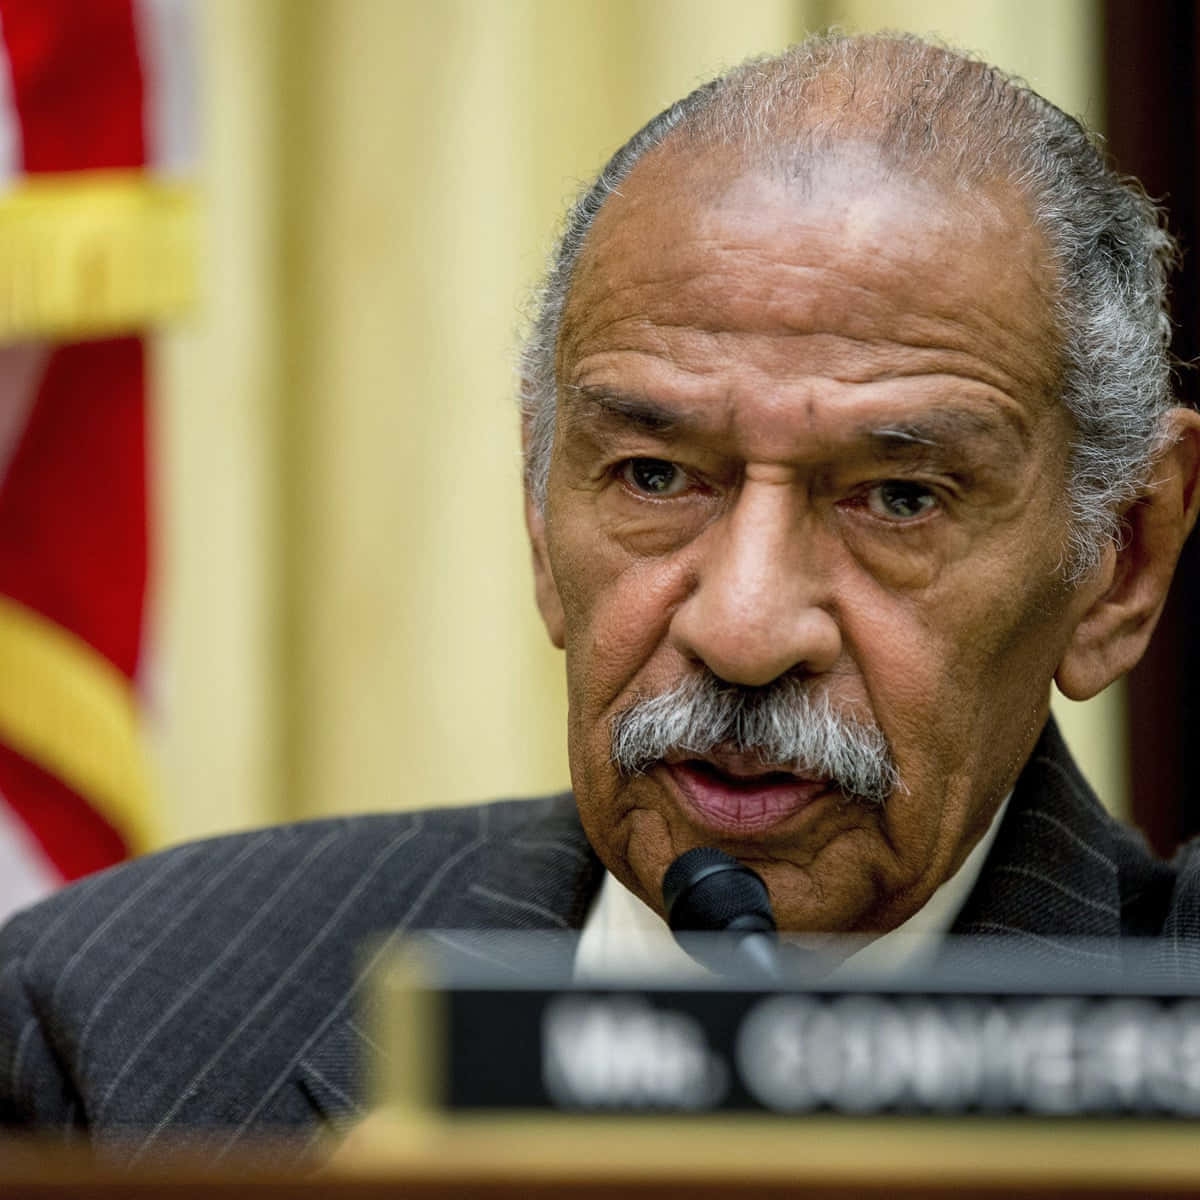 Honorable John Conyers In A Blue Tie And Gray Suit Wallpaper